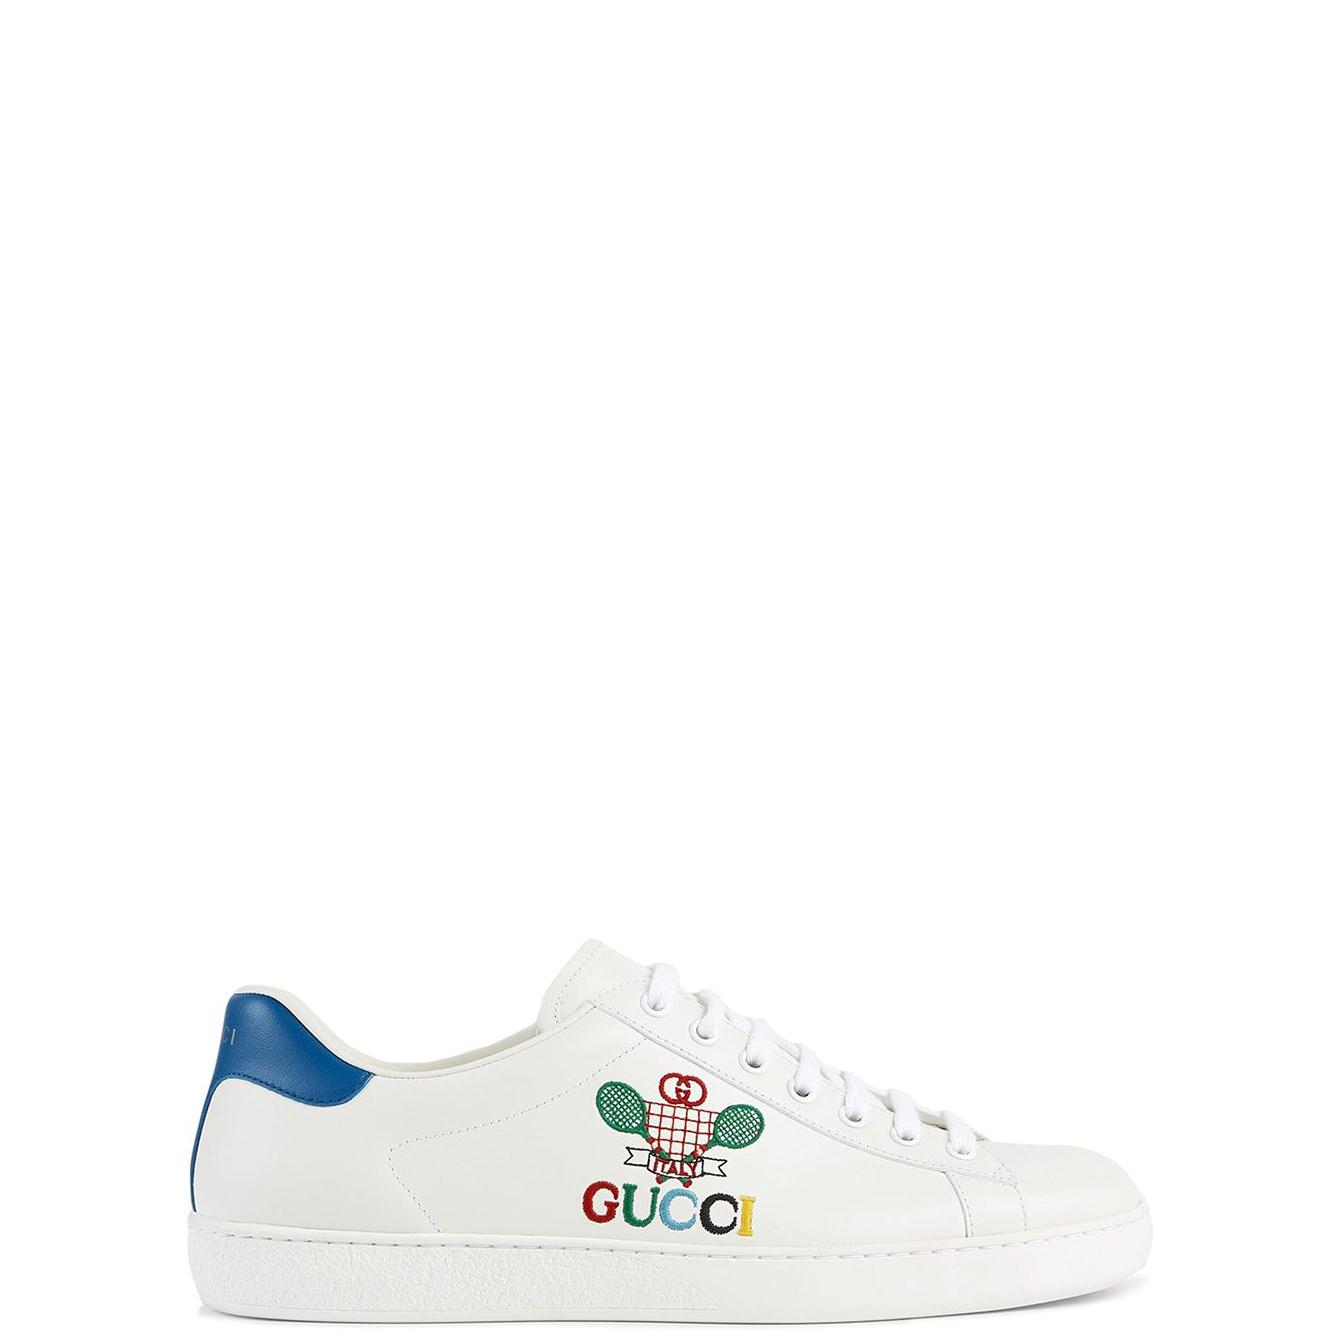 GIÀY GUCCI ACE WITH GUCCI TENNIS CHUẨN 1:1 AUTHENTIC HEAVEN SHOP - SINCE 2013